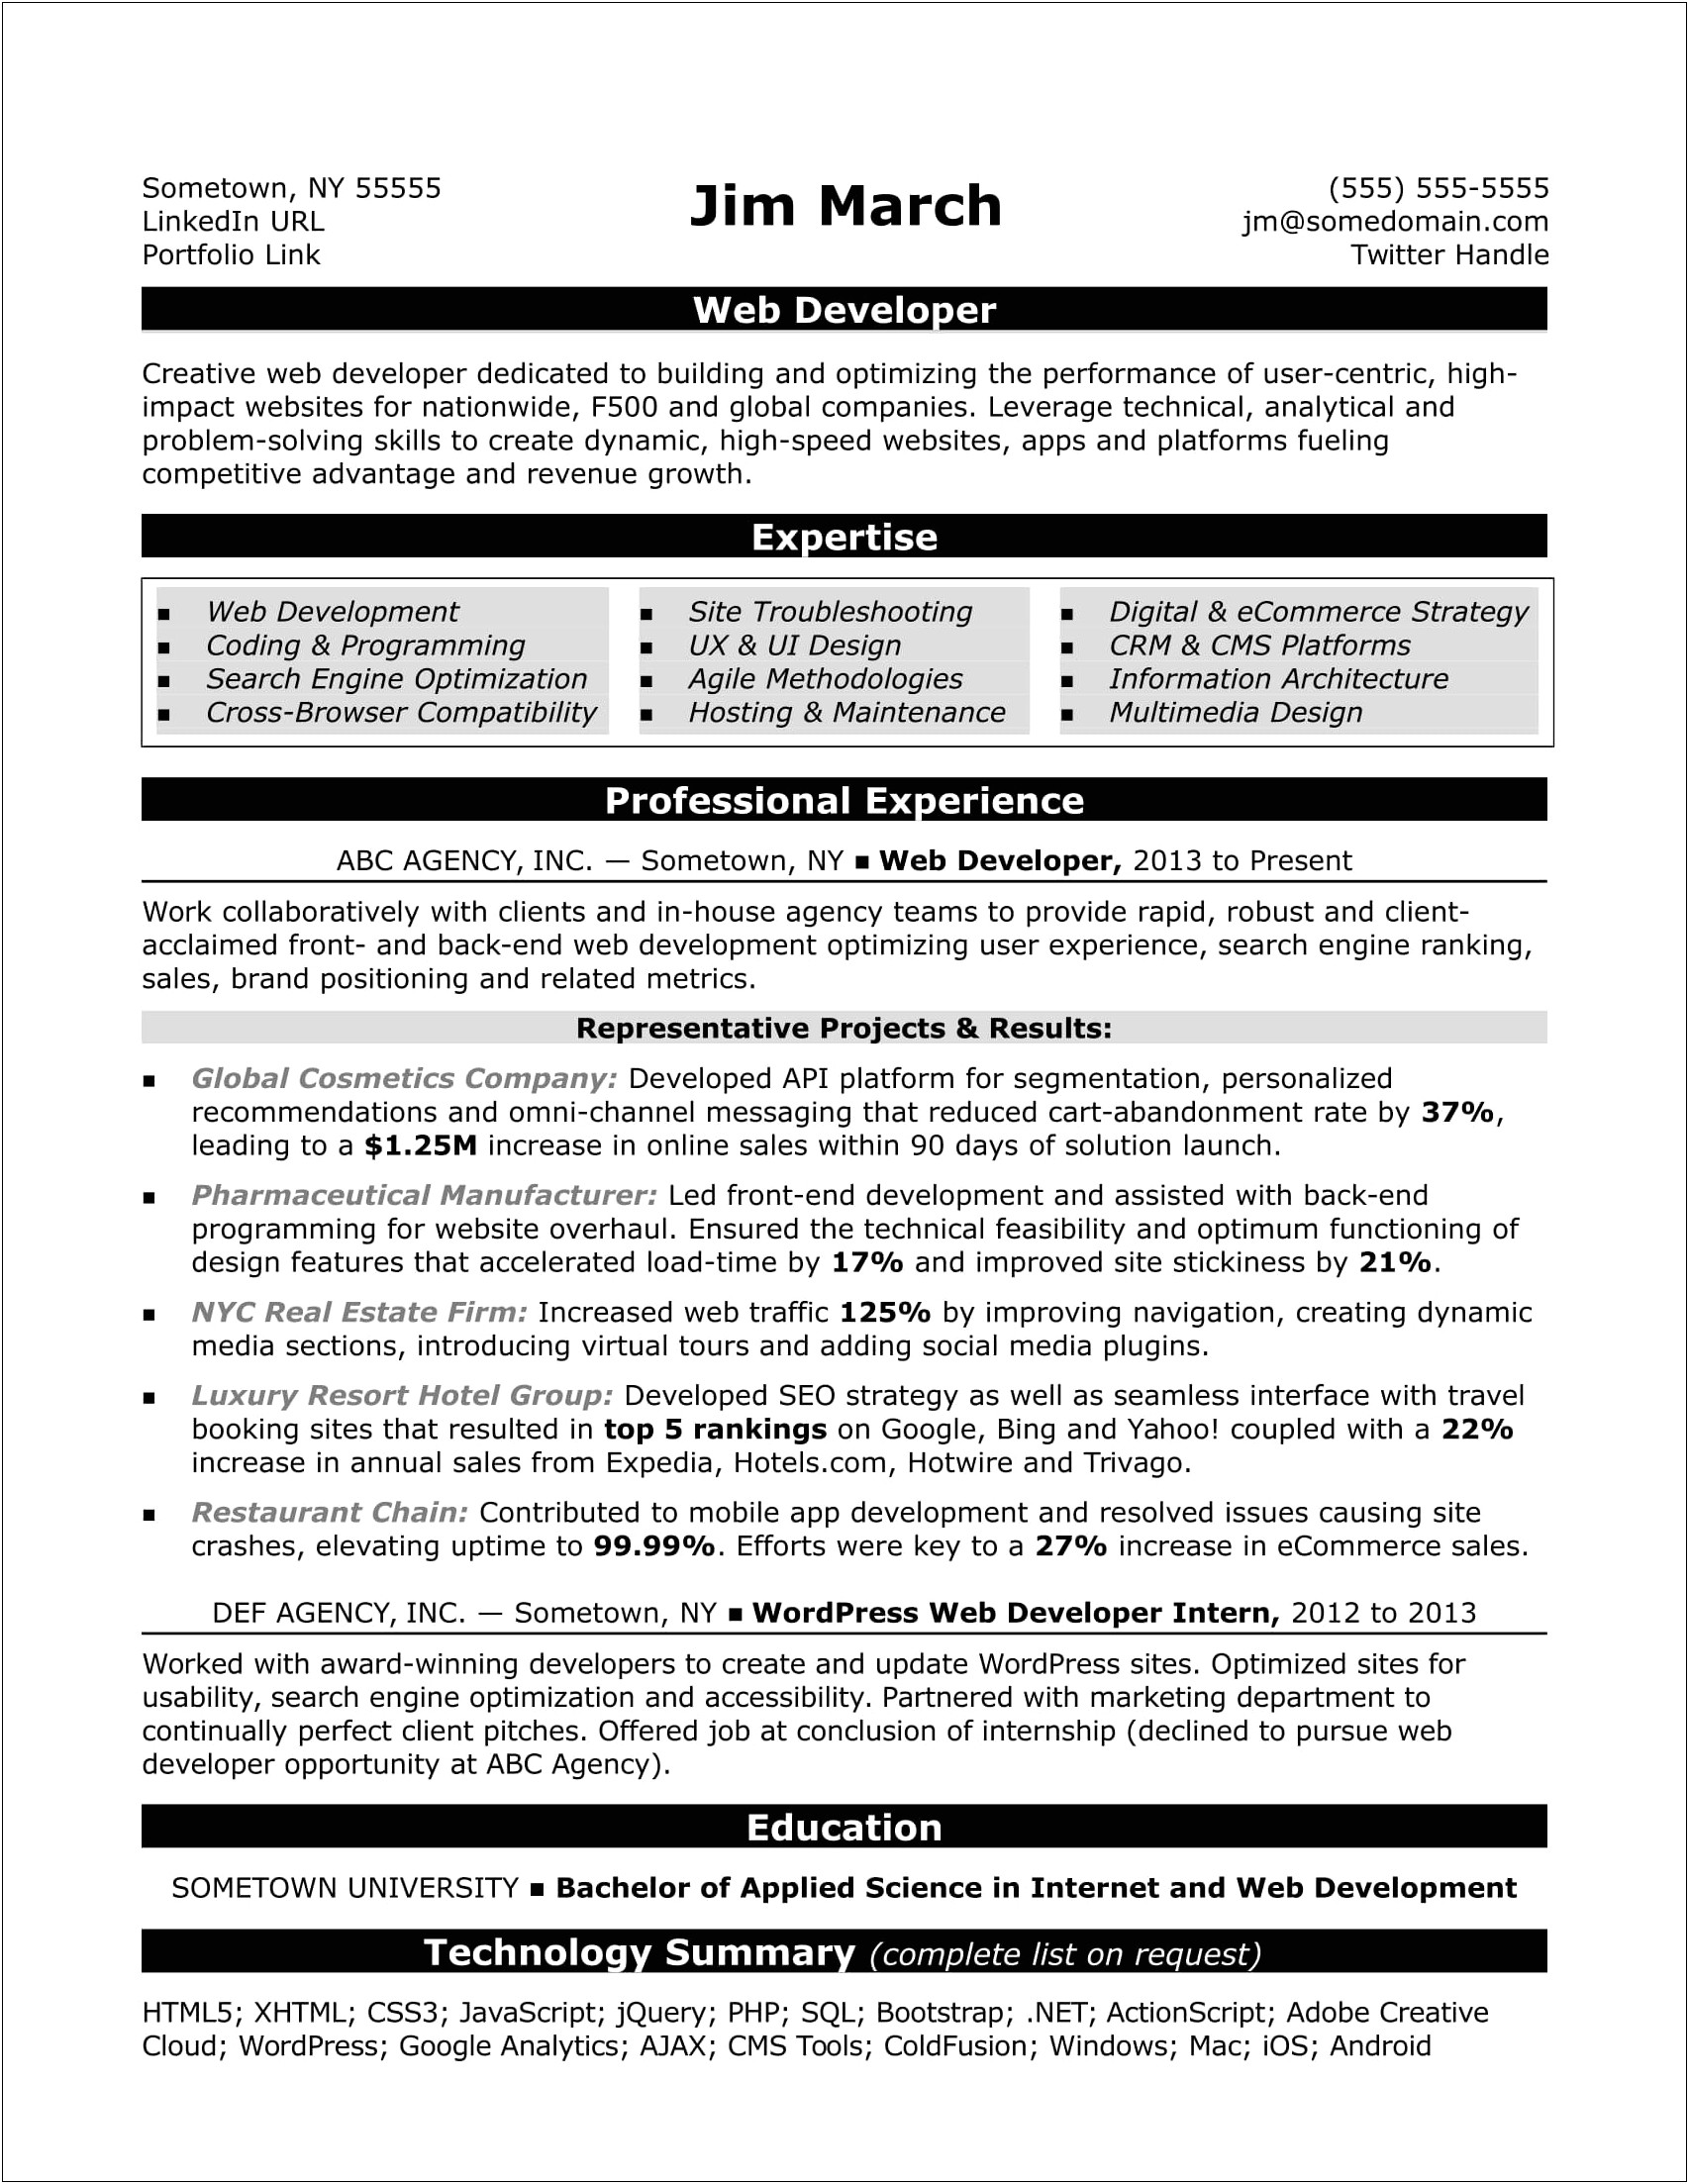 Professional Summary Resume Sample For It